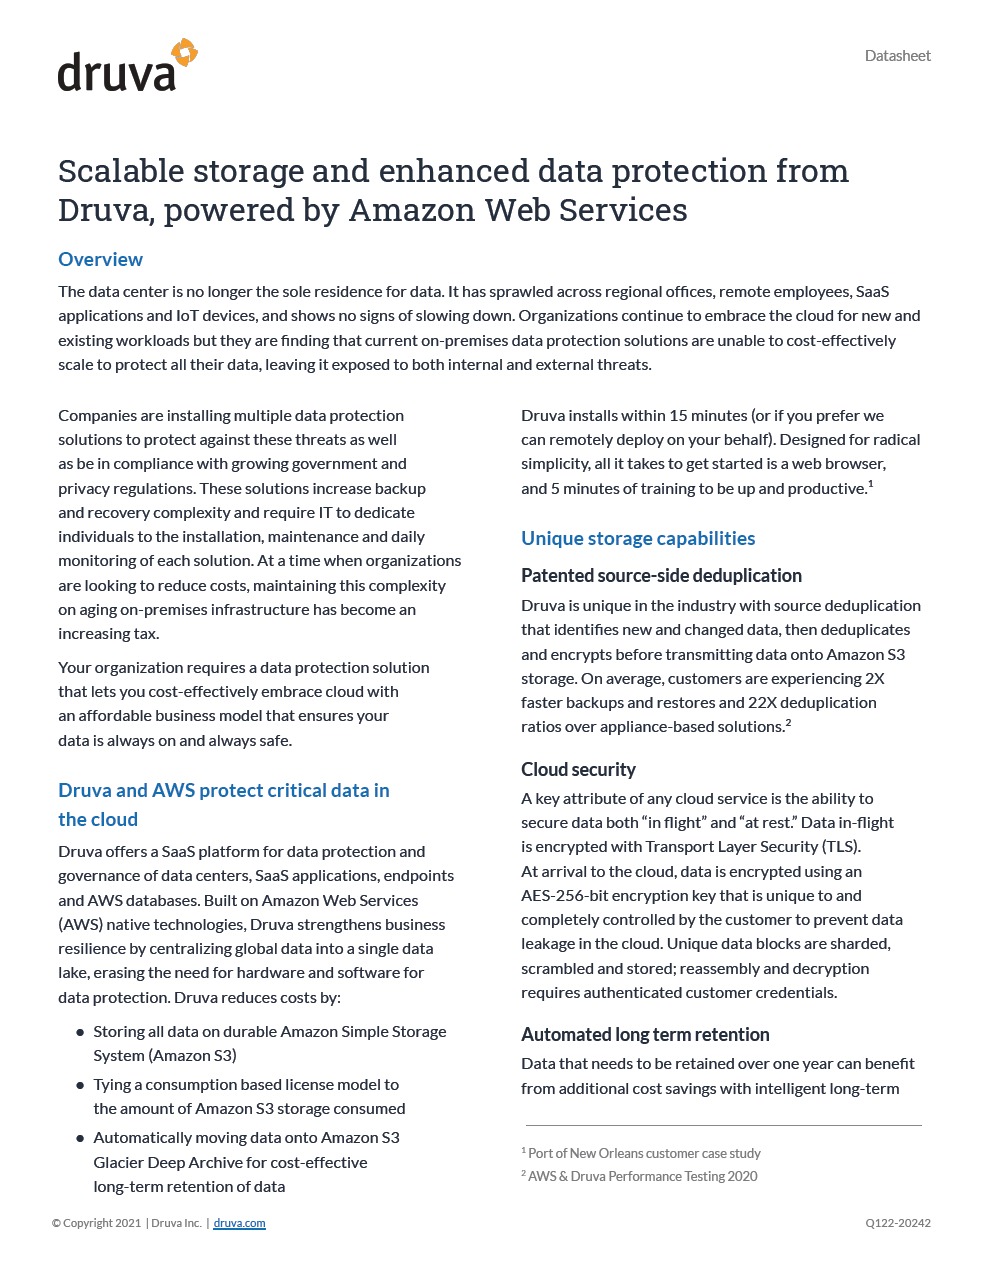 Scalable storage and enhanced data protection from Druva